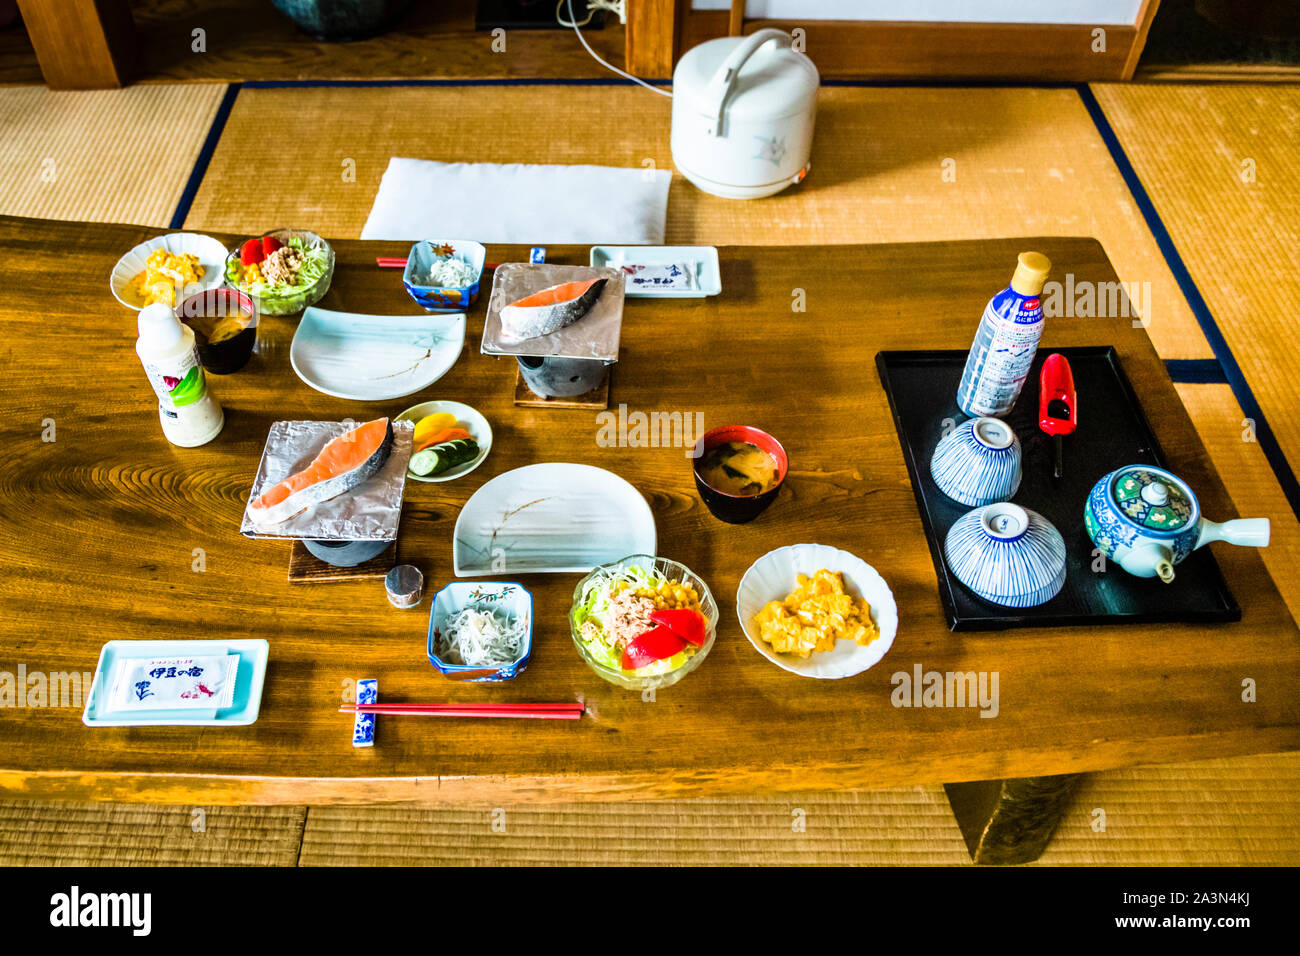 Ichi-ju-san-sai. A traditional Japanese breakfast consists of miso soup and many small dishes Stock Photo